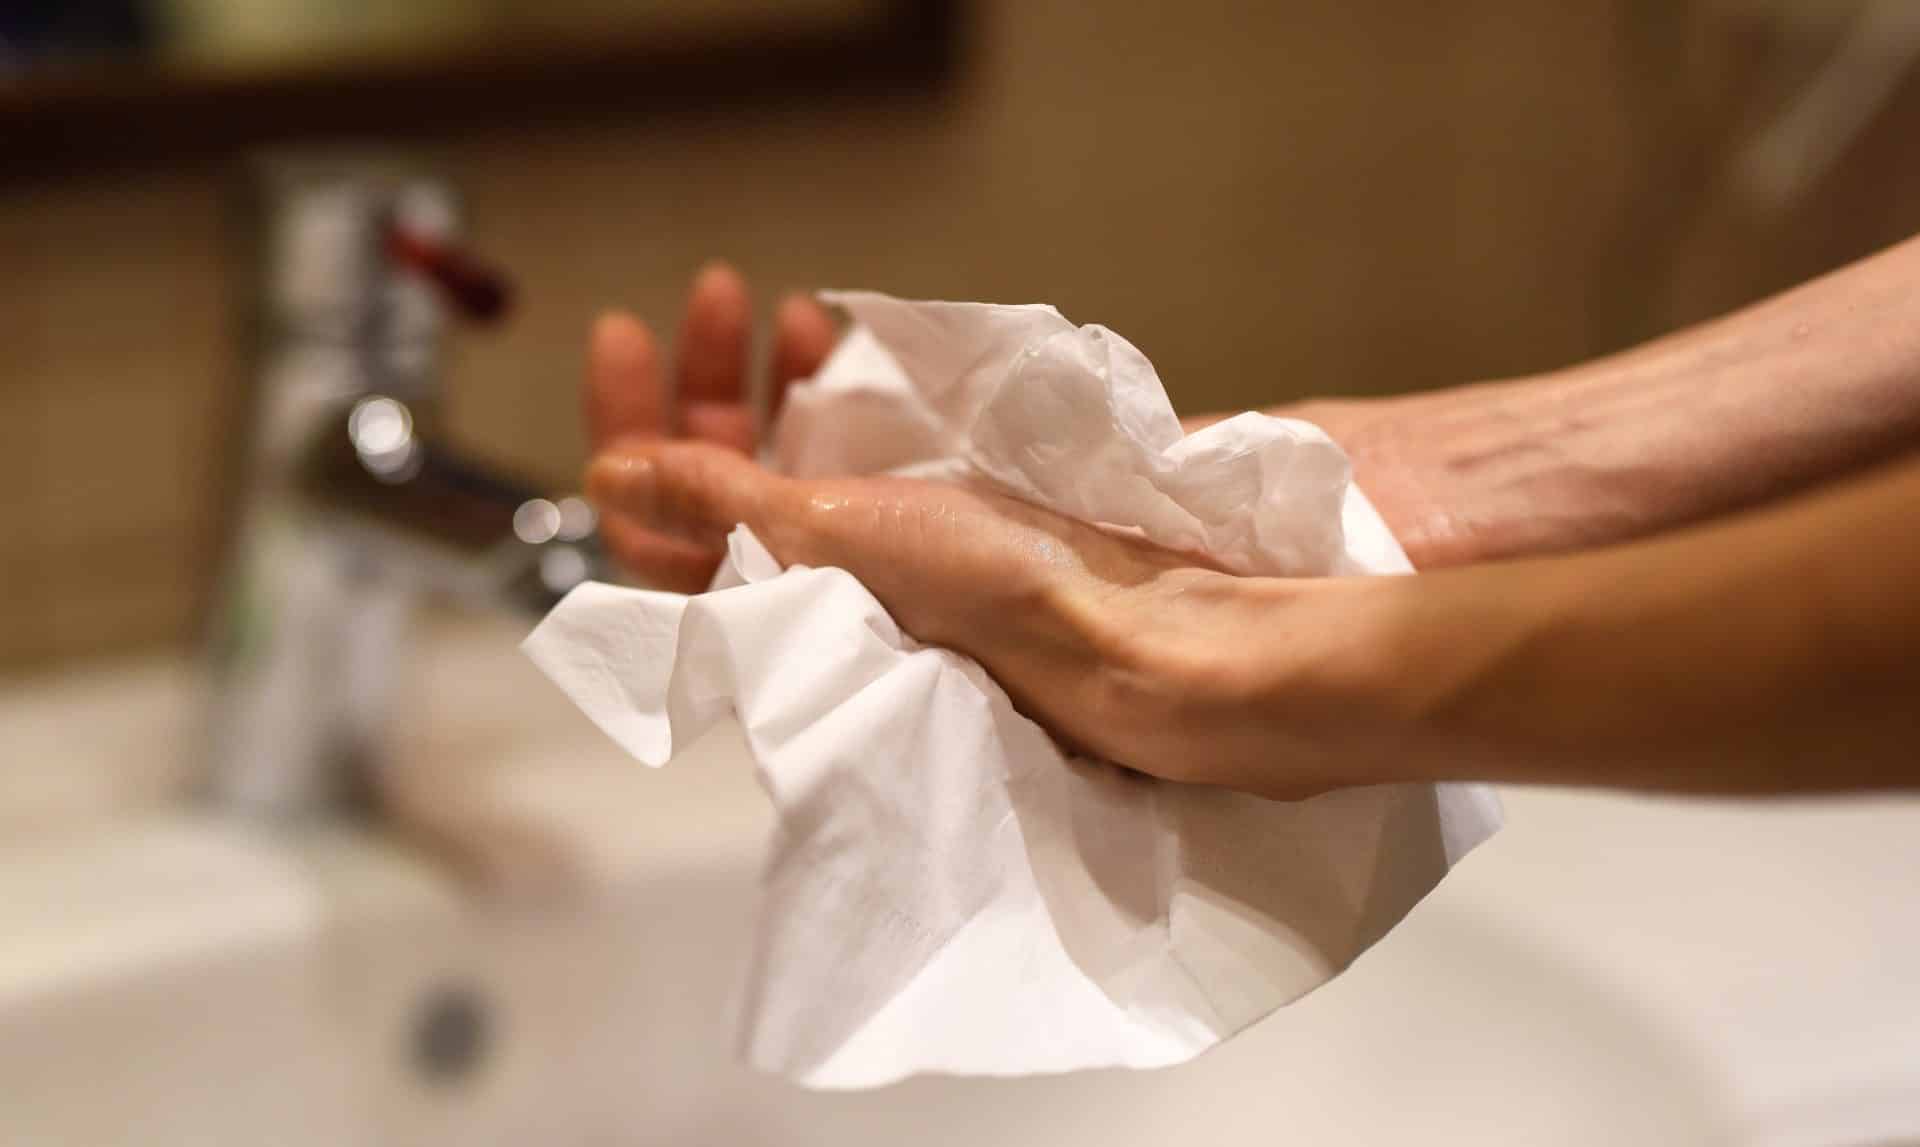 drying hands with a paper towel